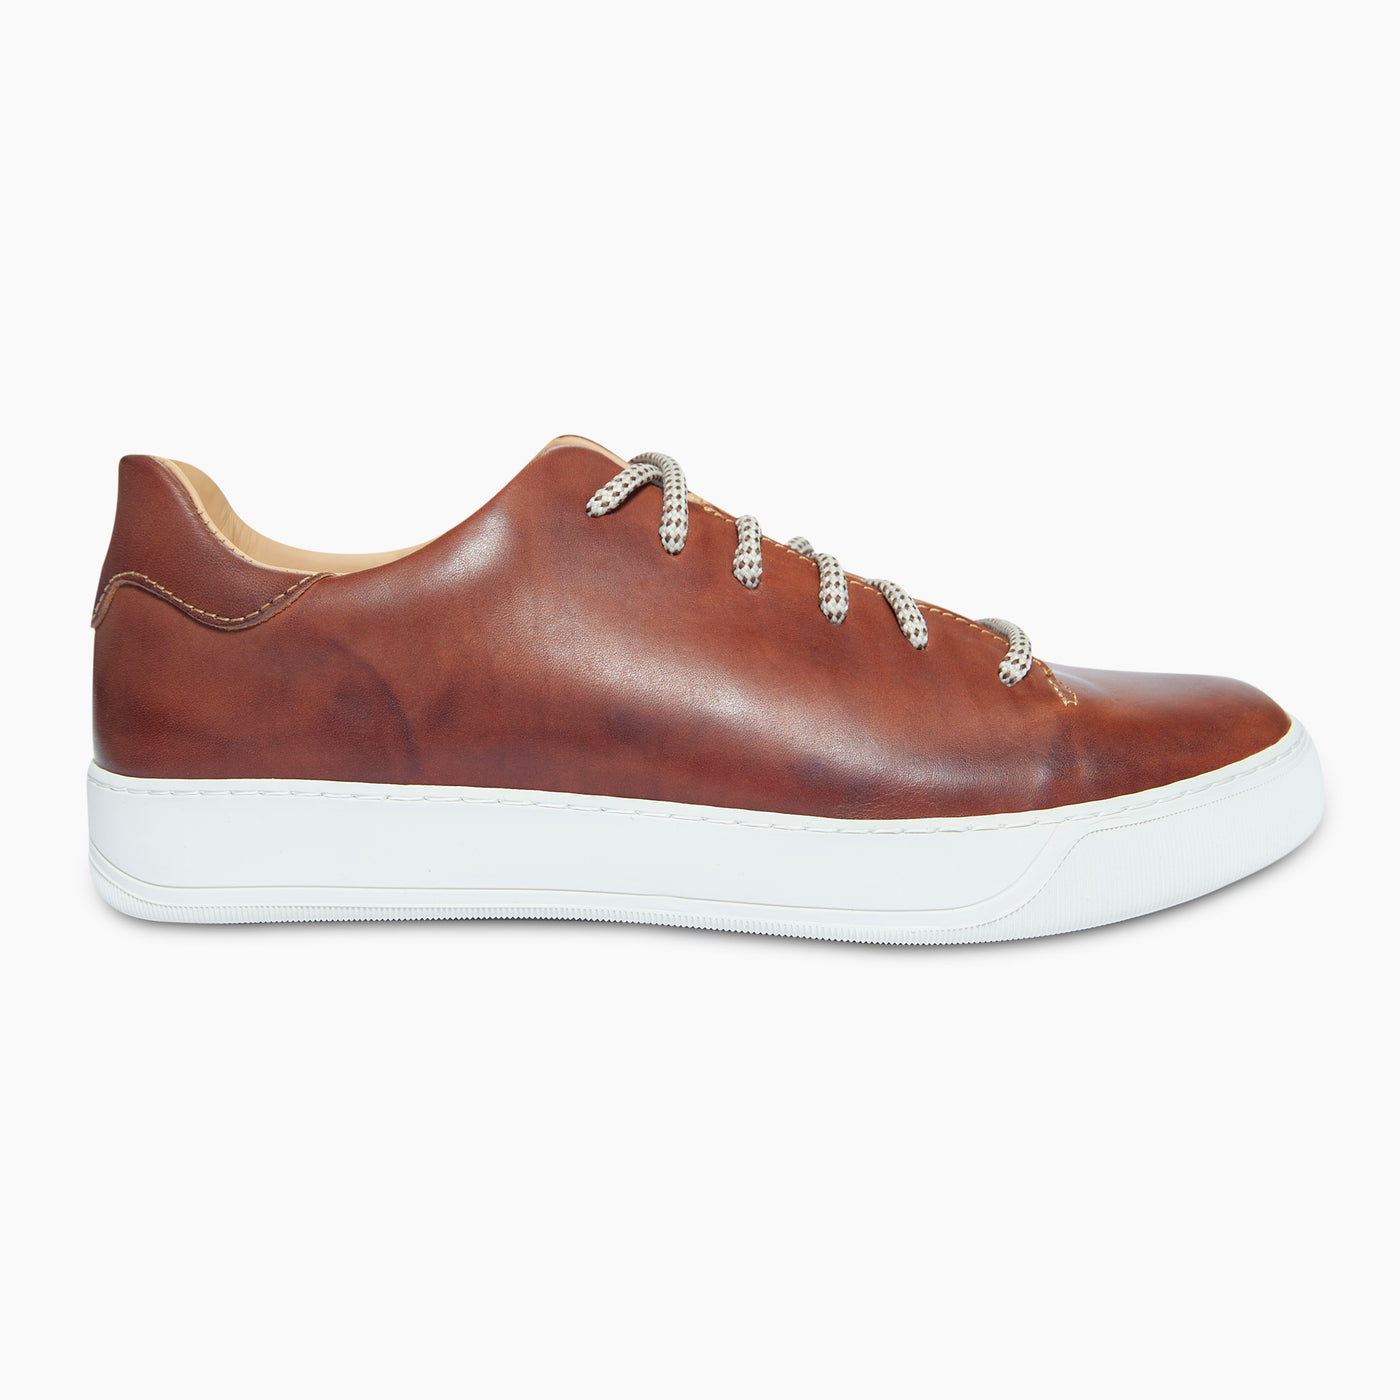 Amir soft nappa with manual finishing leather sneaker (cuoio)